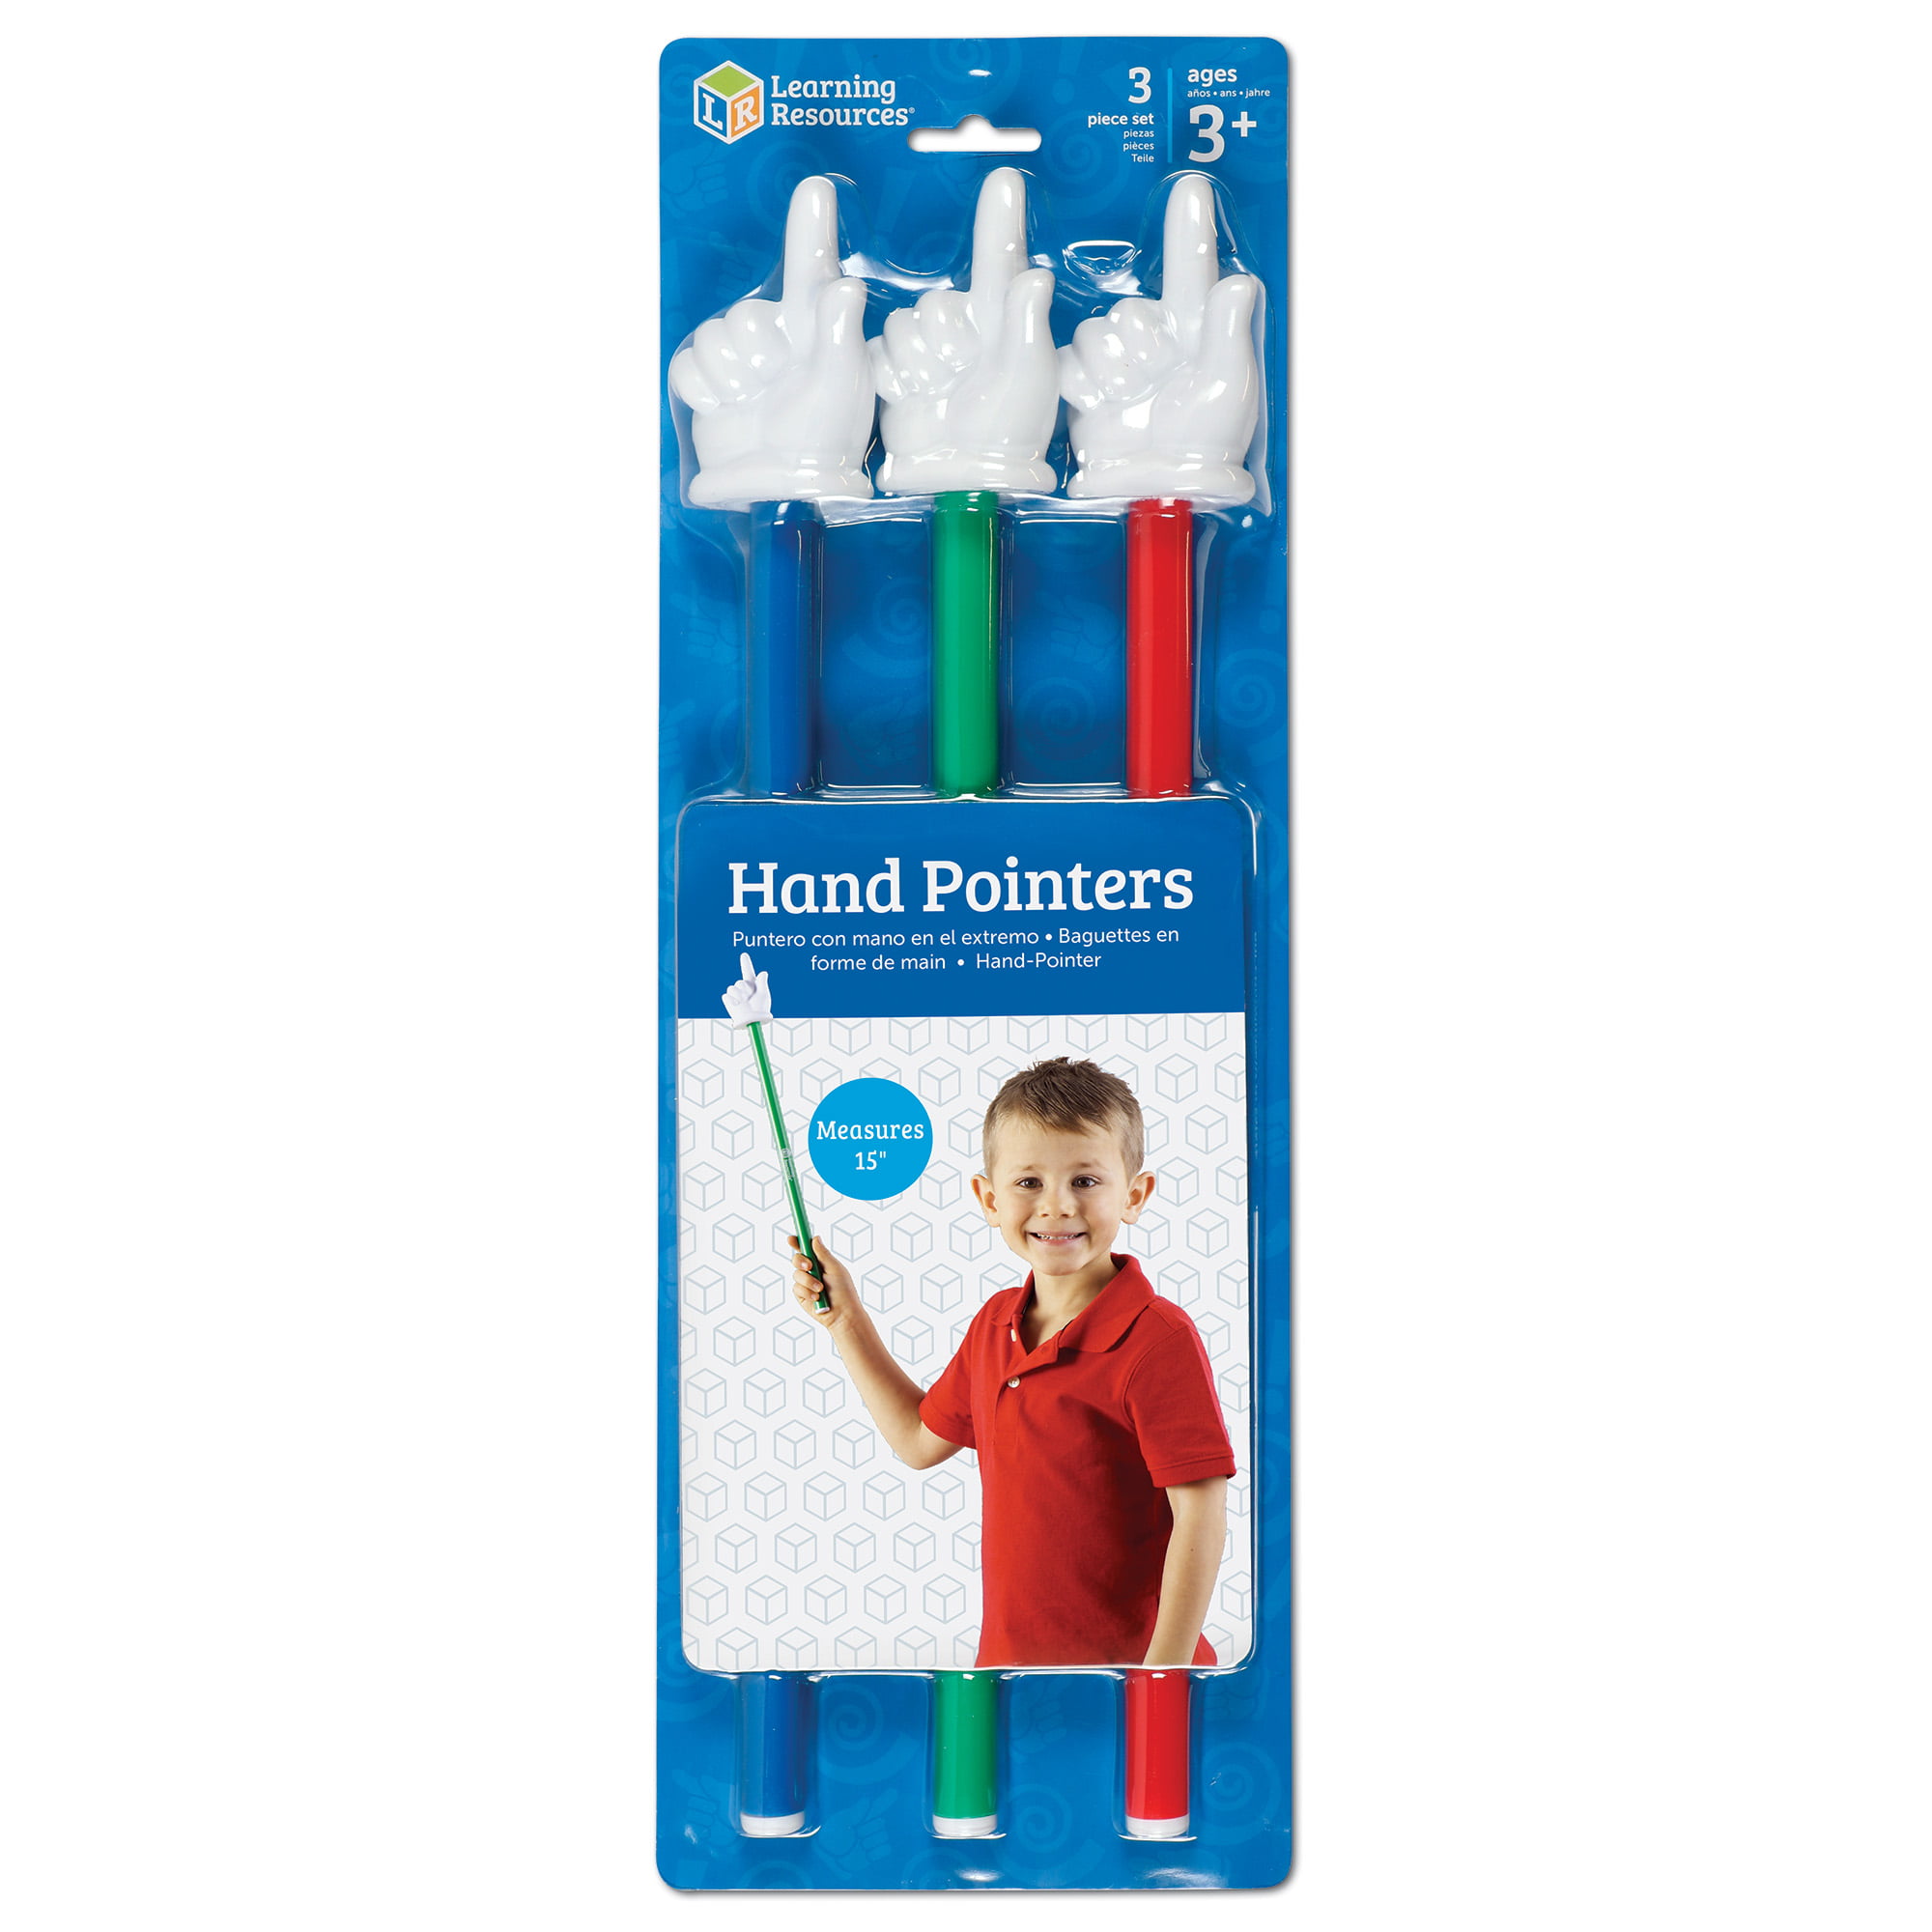 for sale online Learning Resources LER1960 24 Hand Pointers Set of 3 